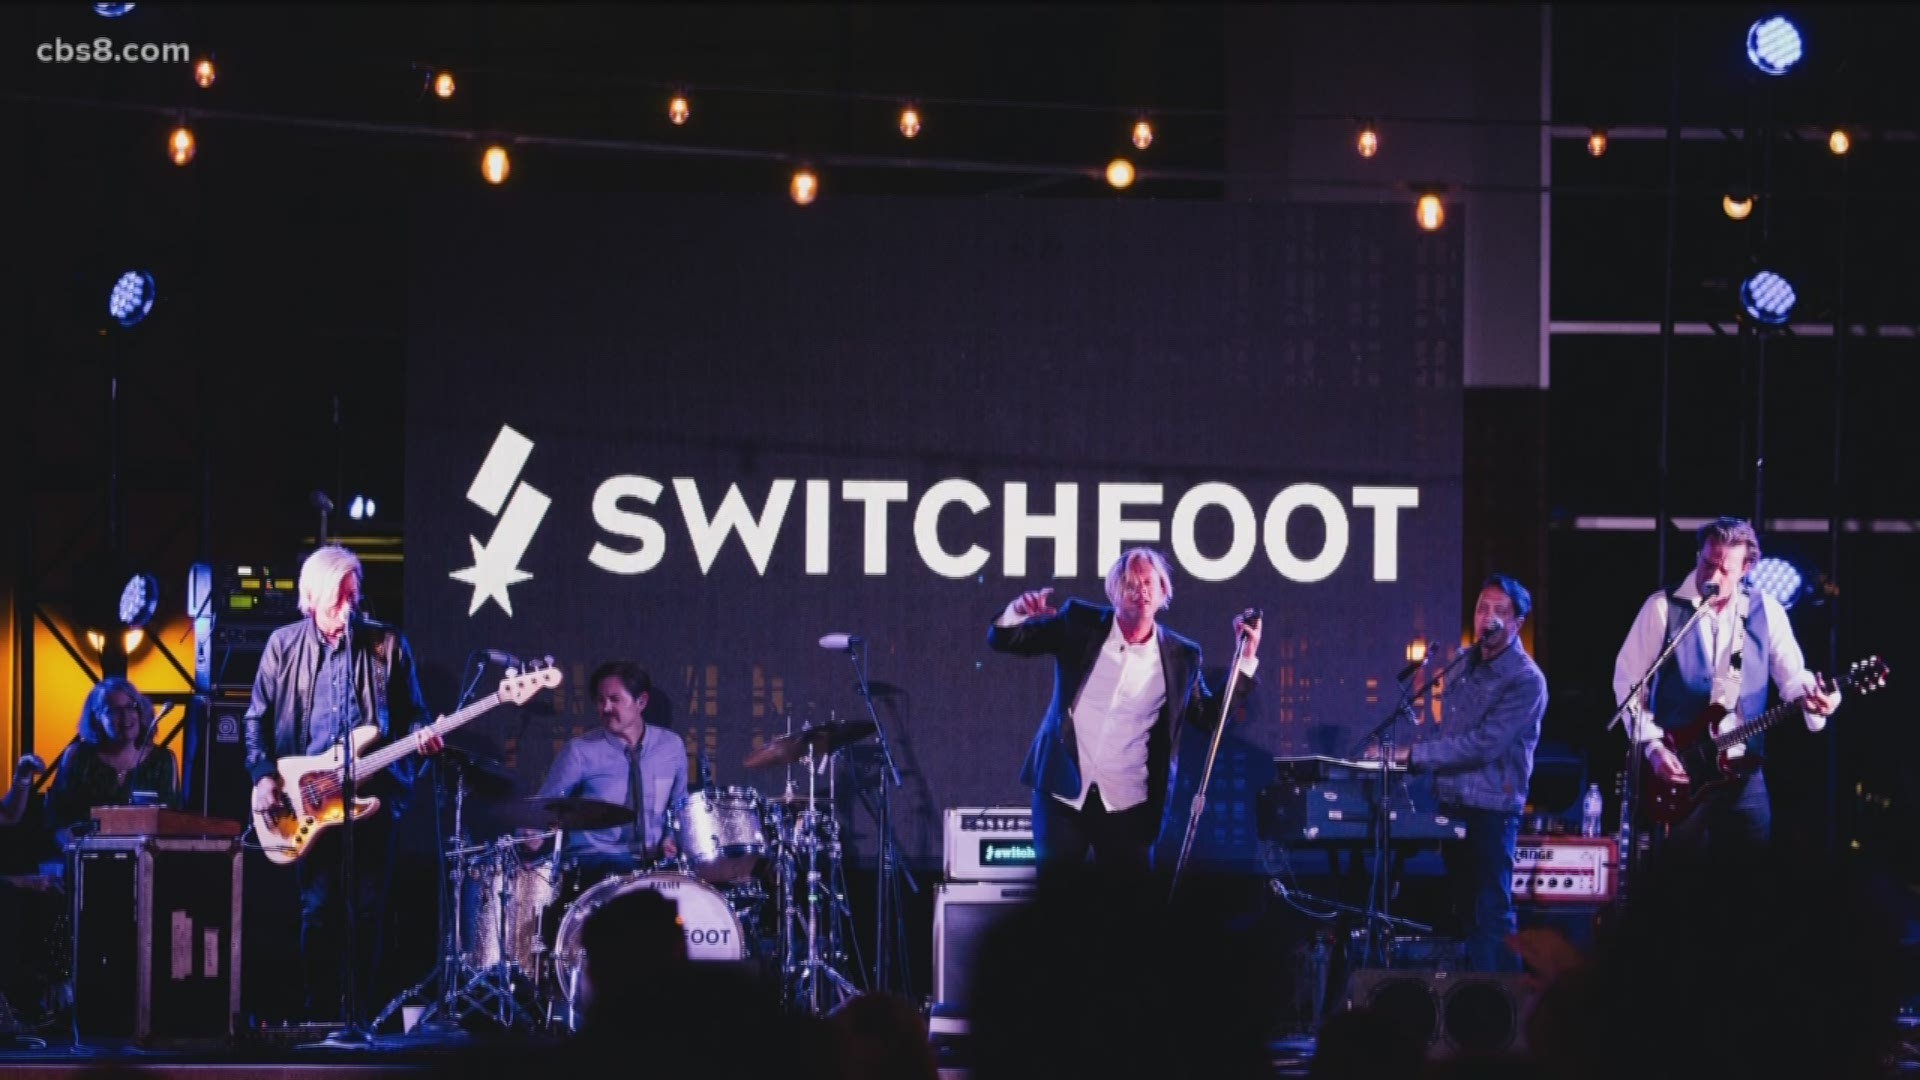 What started as an idea for Grammy-winning band Switchfoot to give back to their community is now in its 15th year of spreading the love!